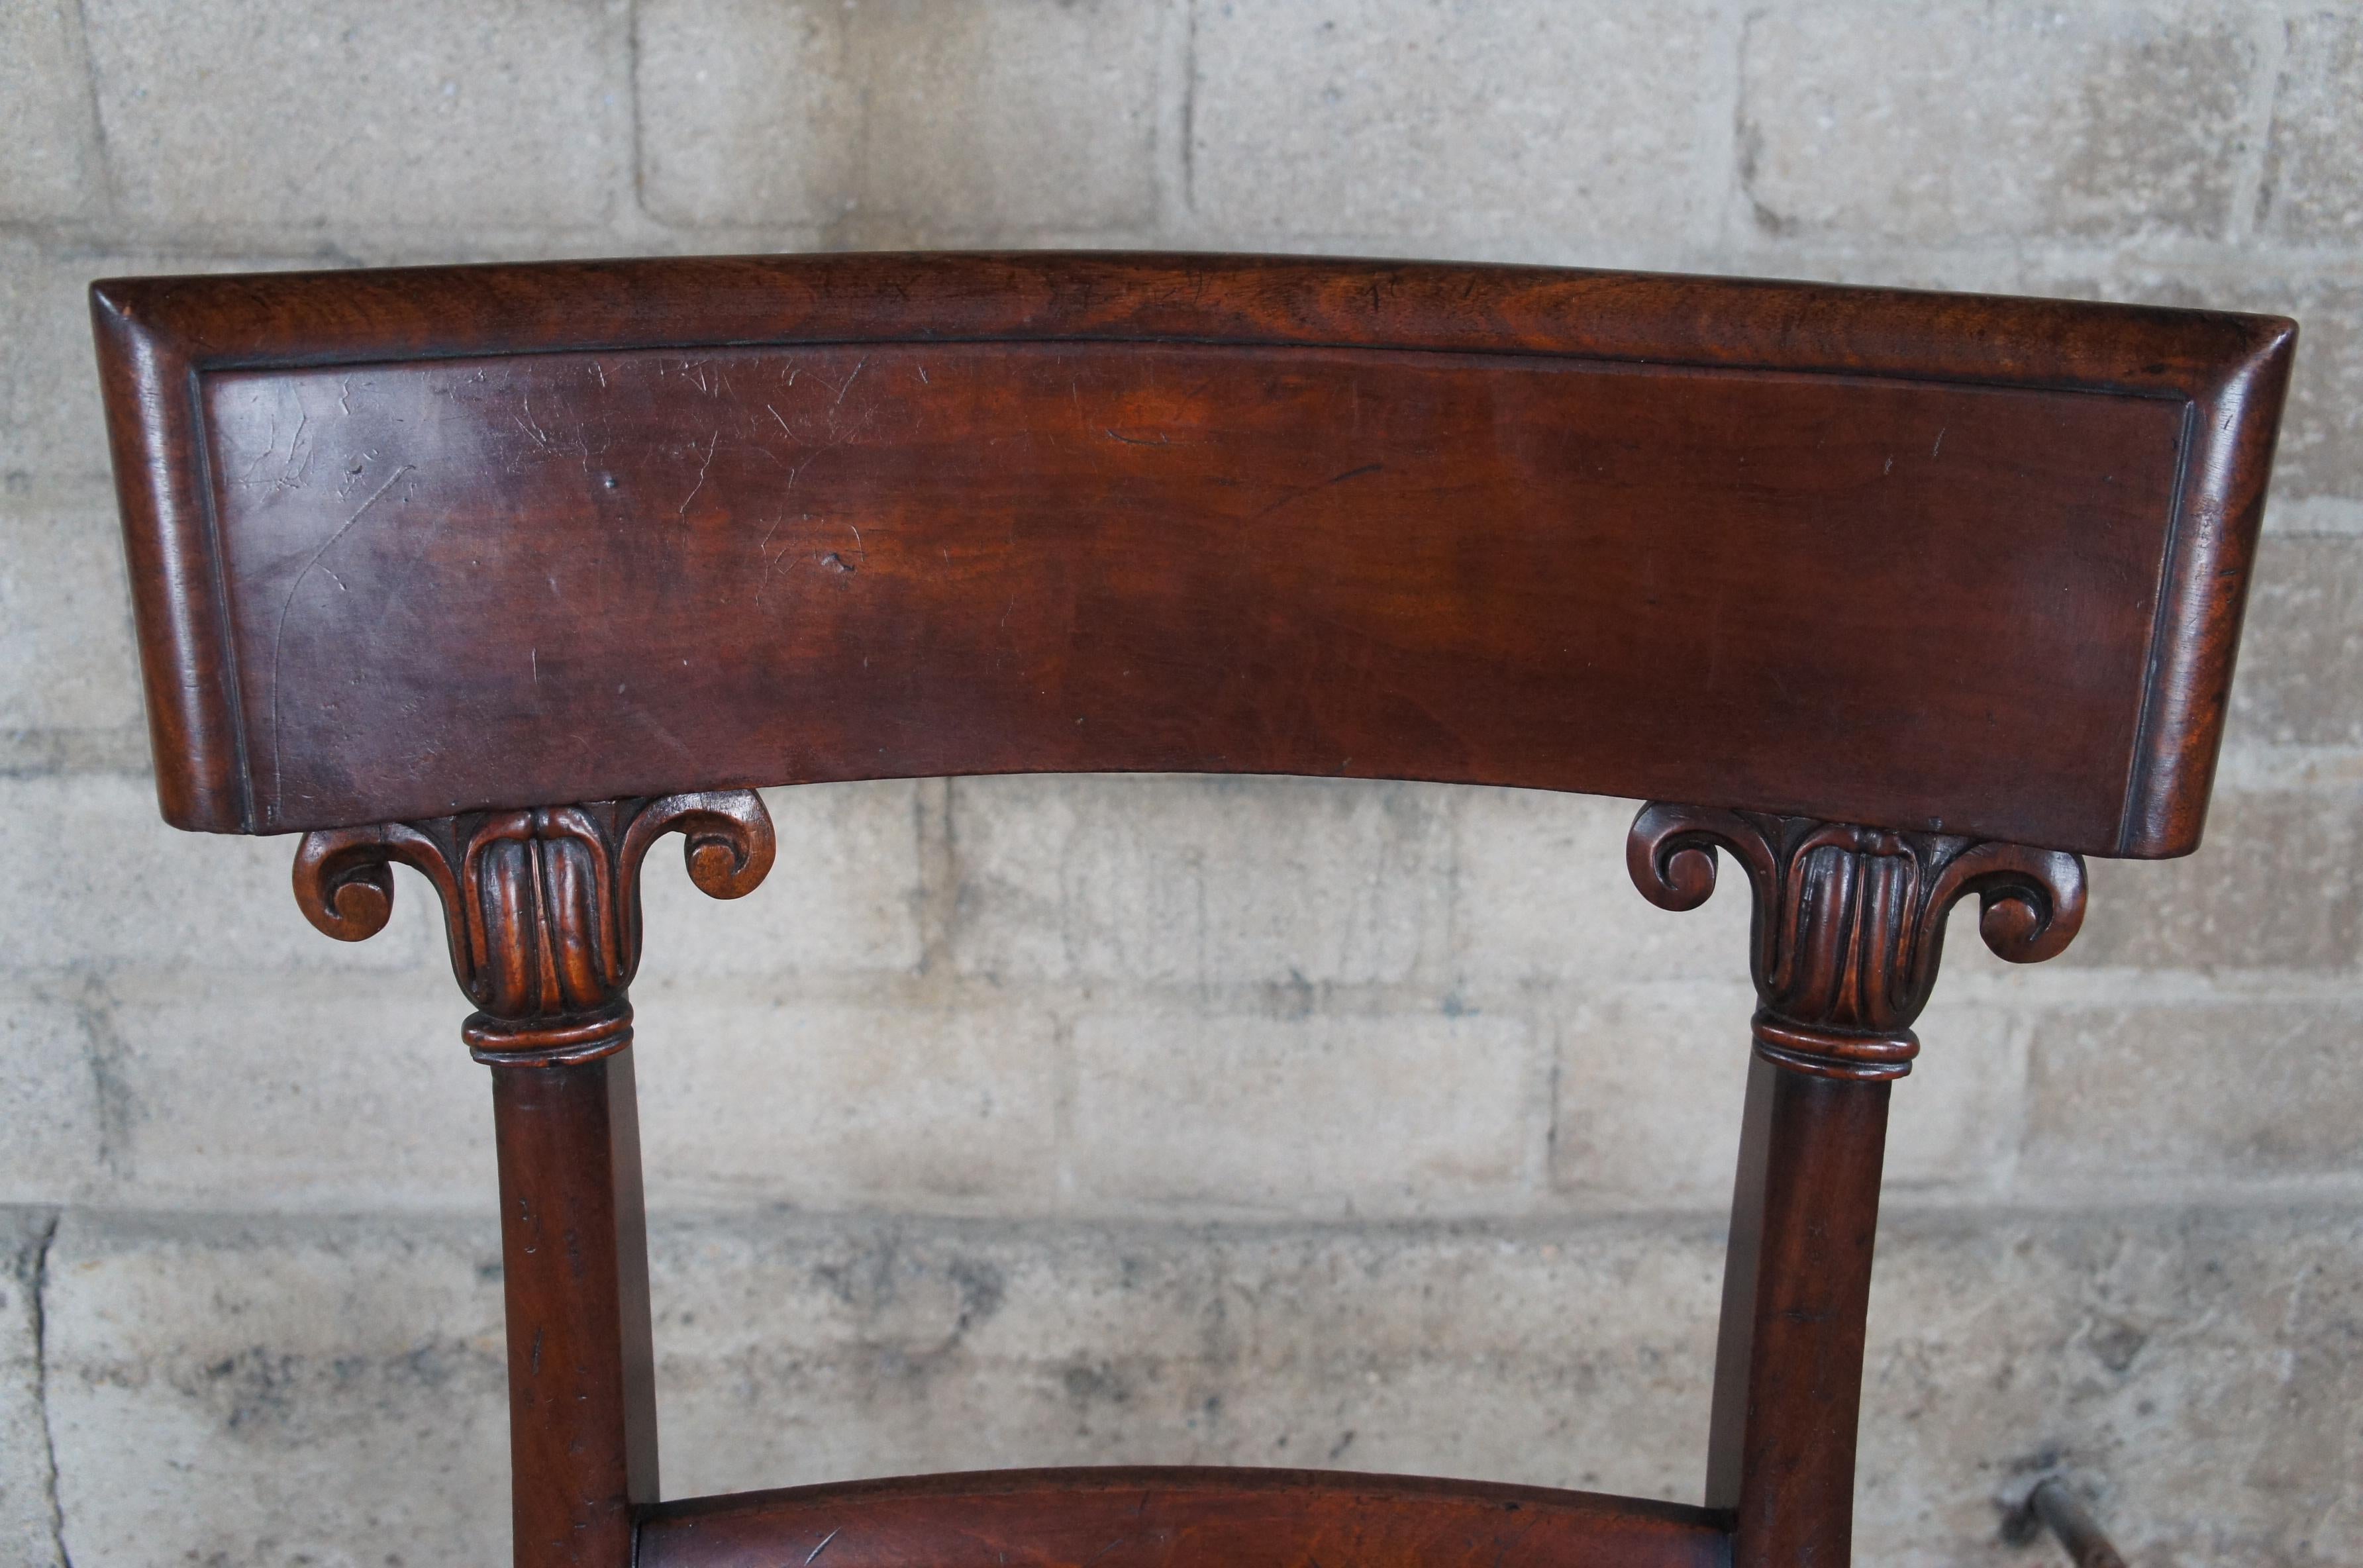 Upholstery Antique 19th Century English Regency Mahogany Dining Side Desk Chair Empire